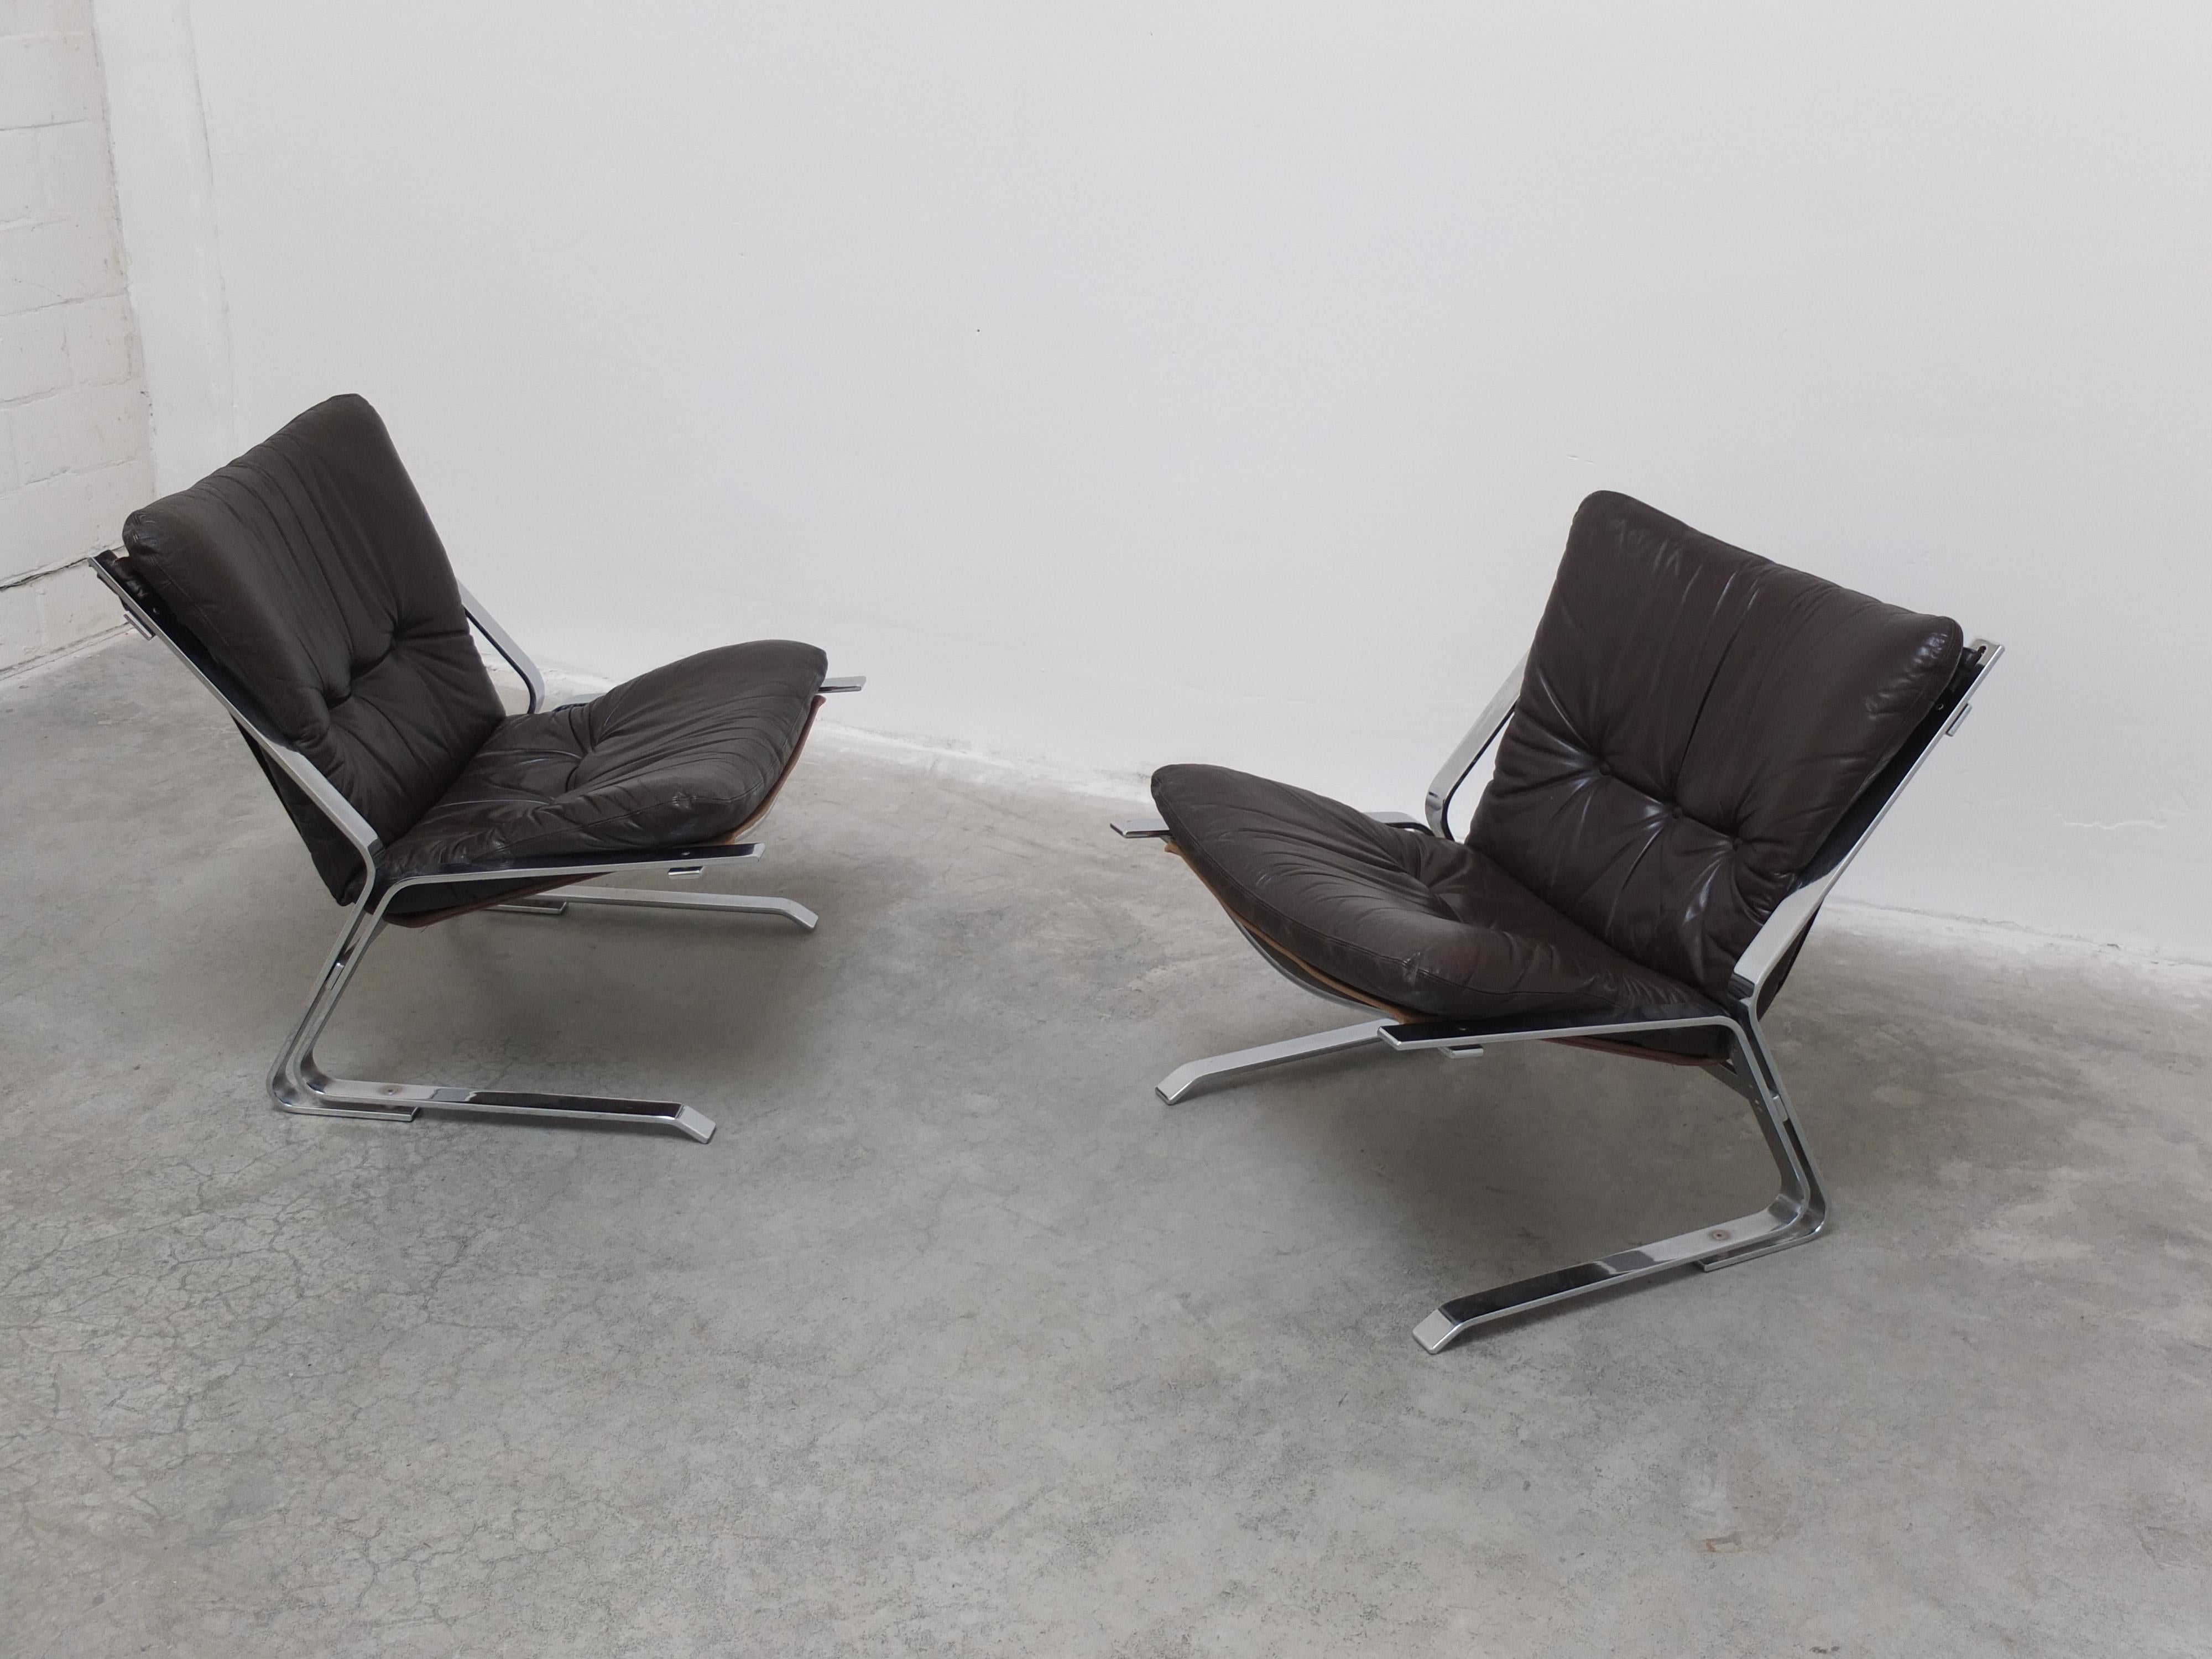 Rare Pair of 'Pirate' Lounge Chairs by Elsa & Nordahl Solheim for Rykken, 1960s For Sale 2